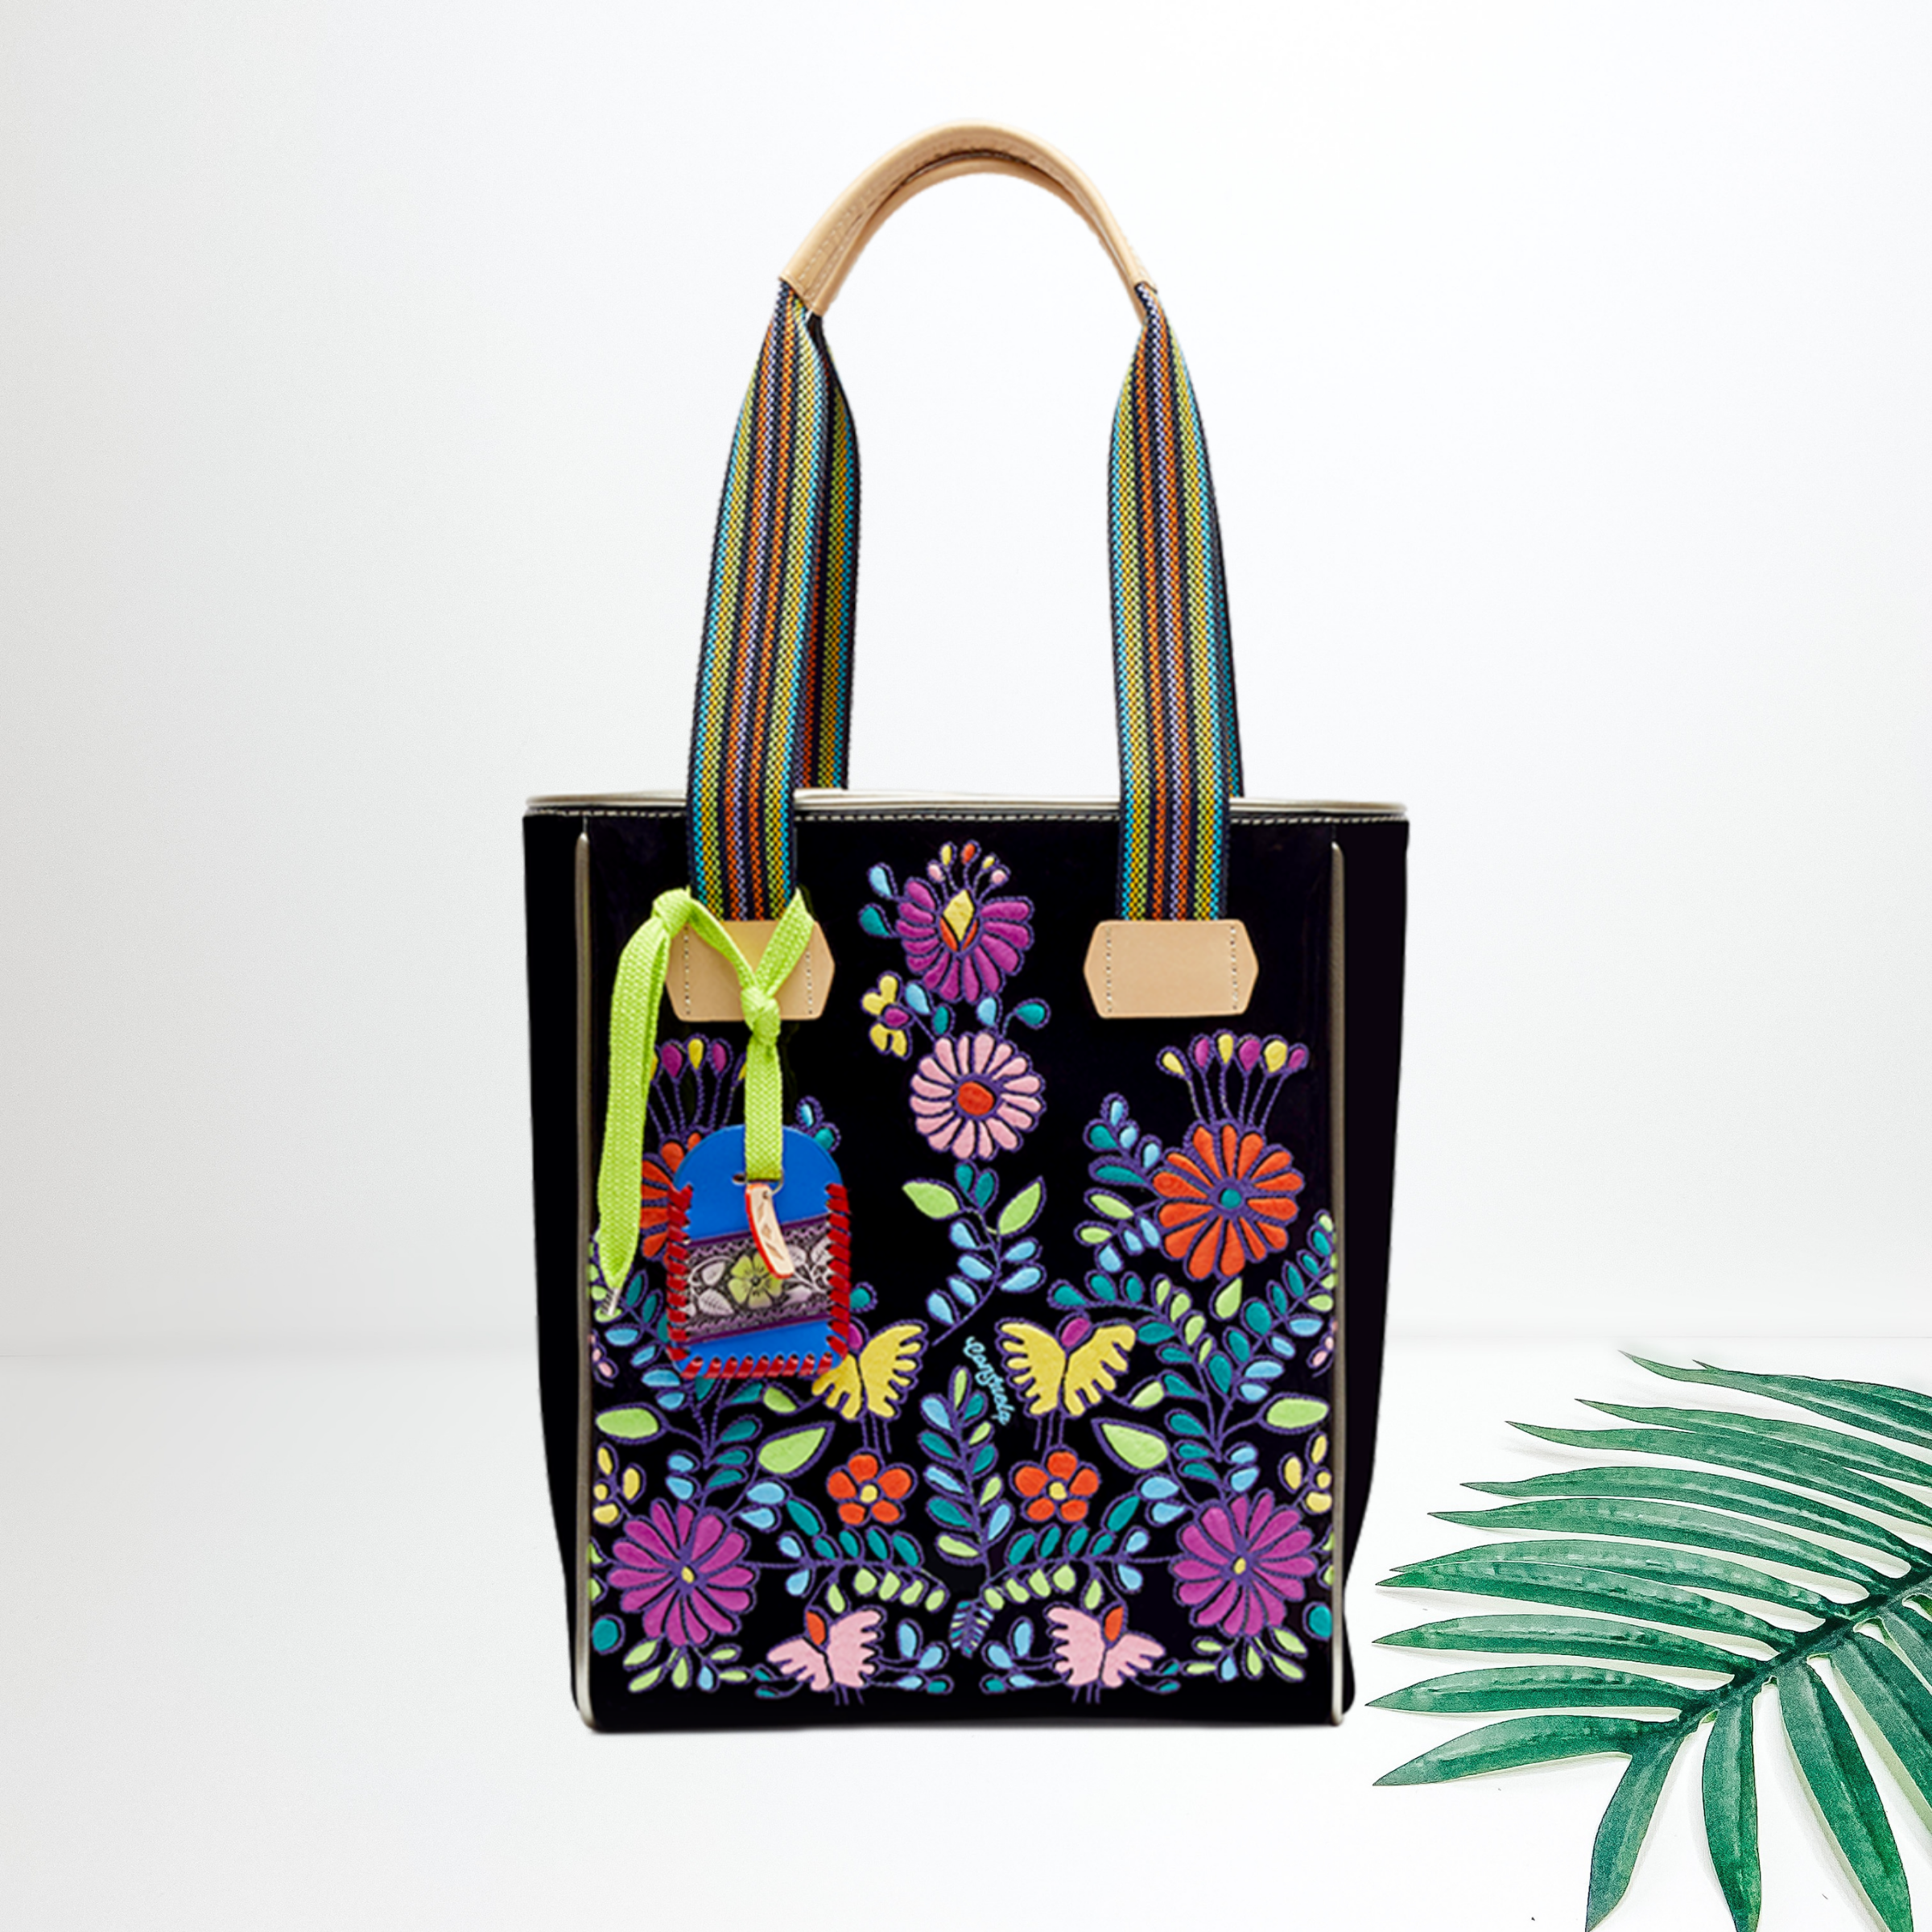 Centered in the picture is a tote bag in black with multi colored embroidery. To the right of the tote is a palm left, all on a white background.